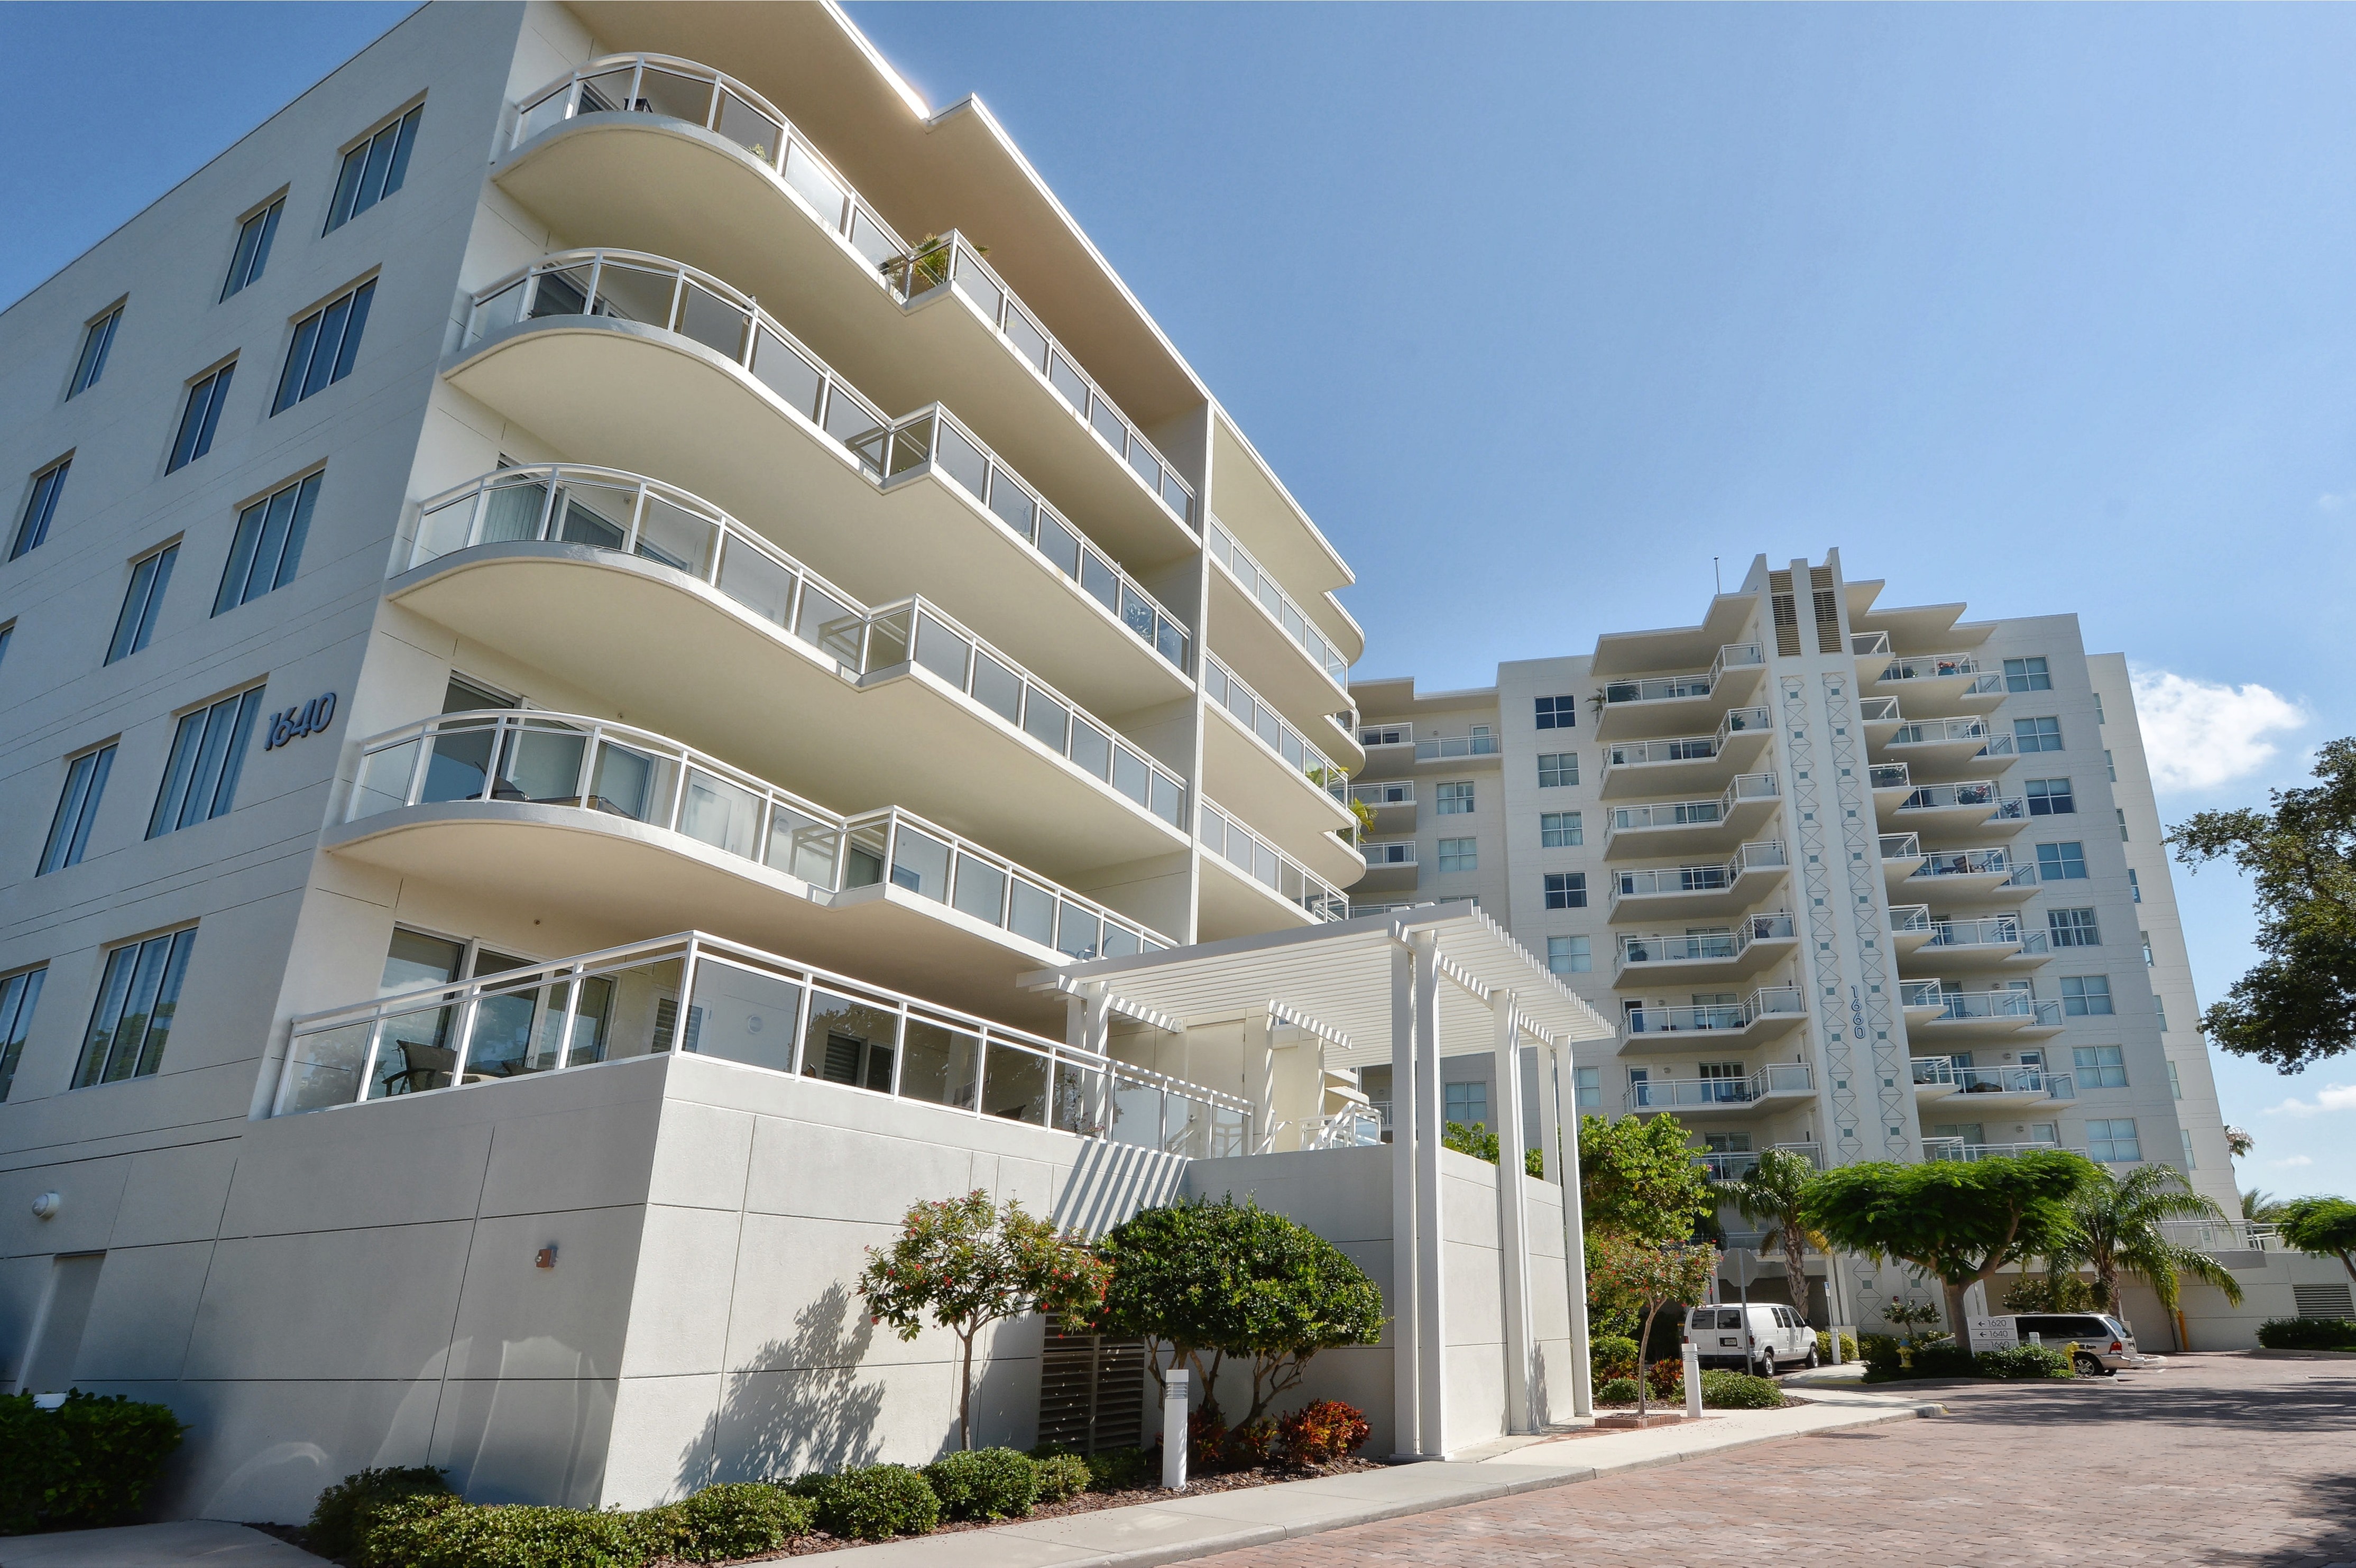 yacht cove condos for sale zillow